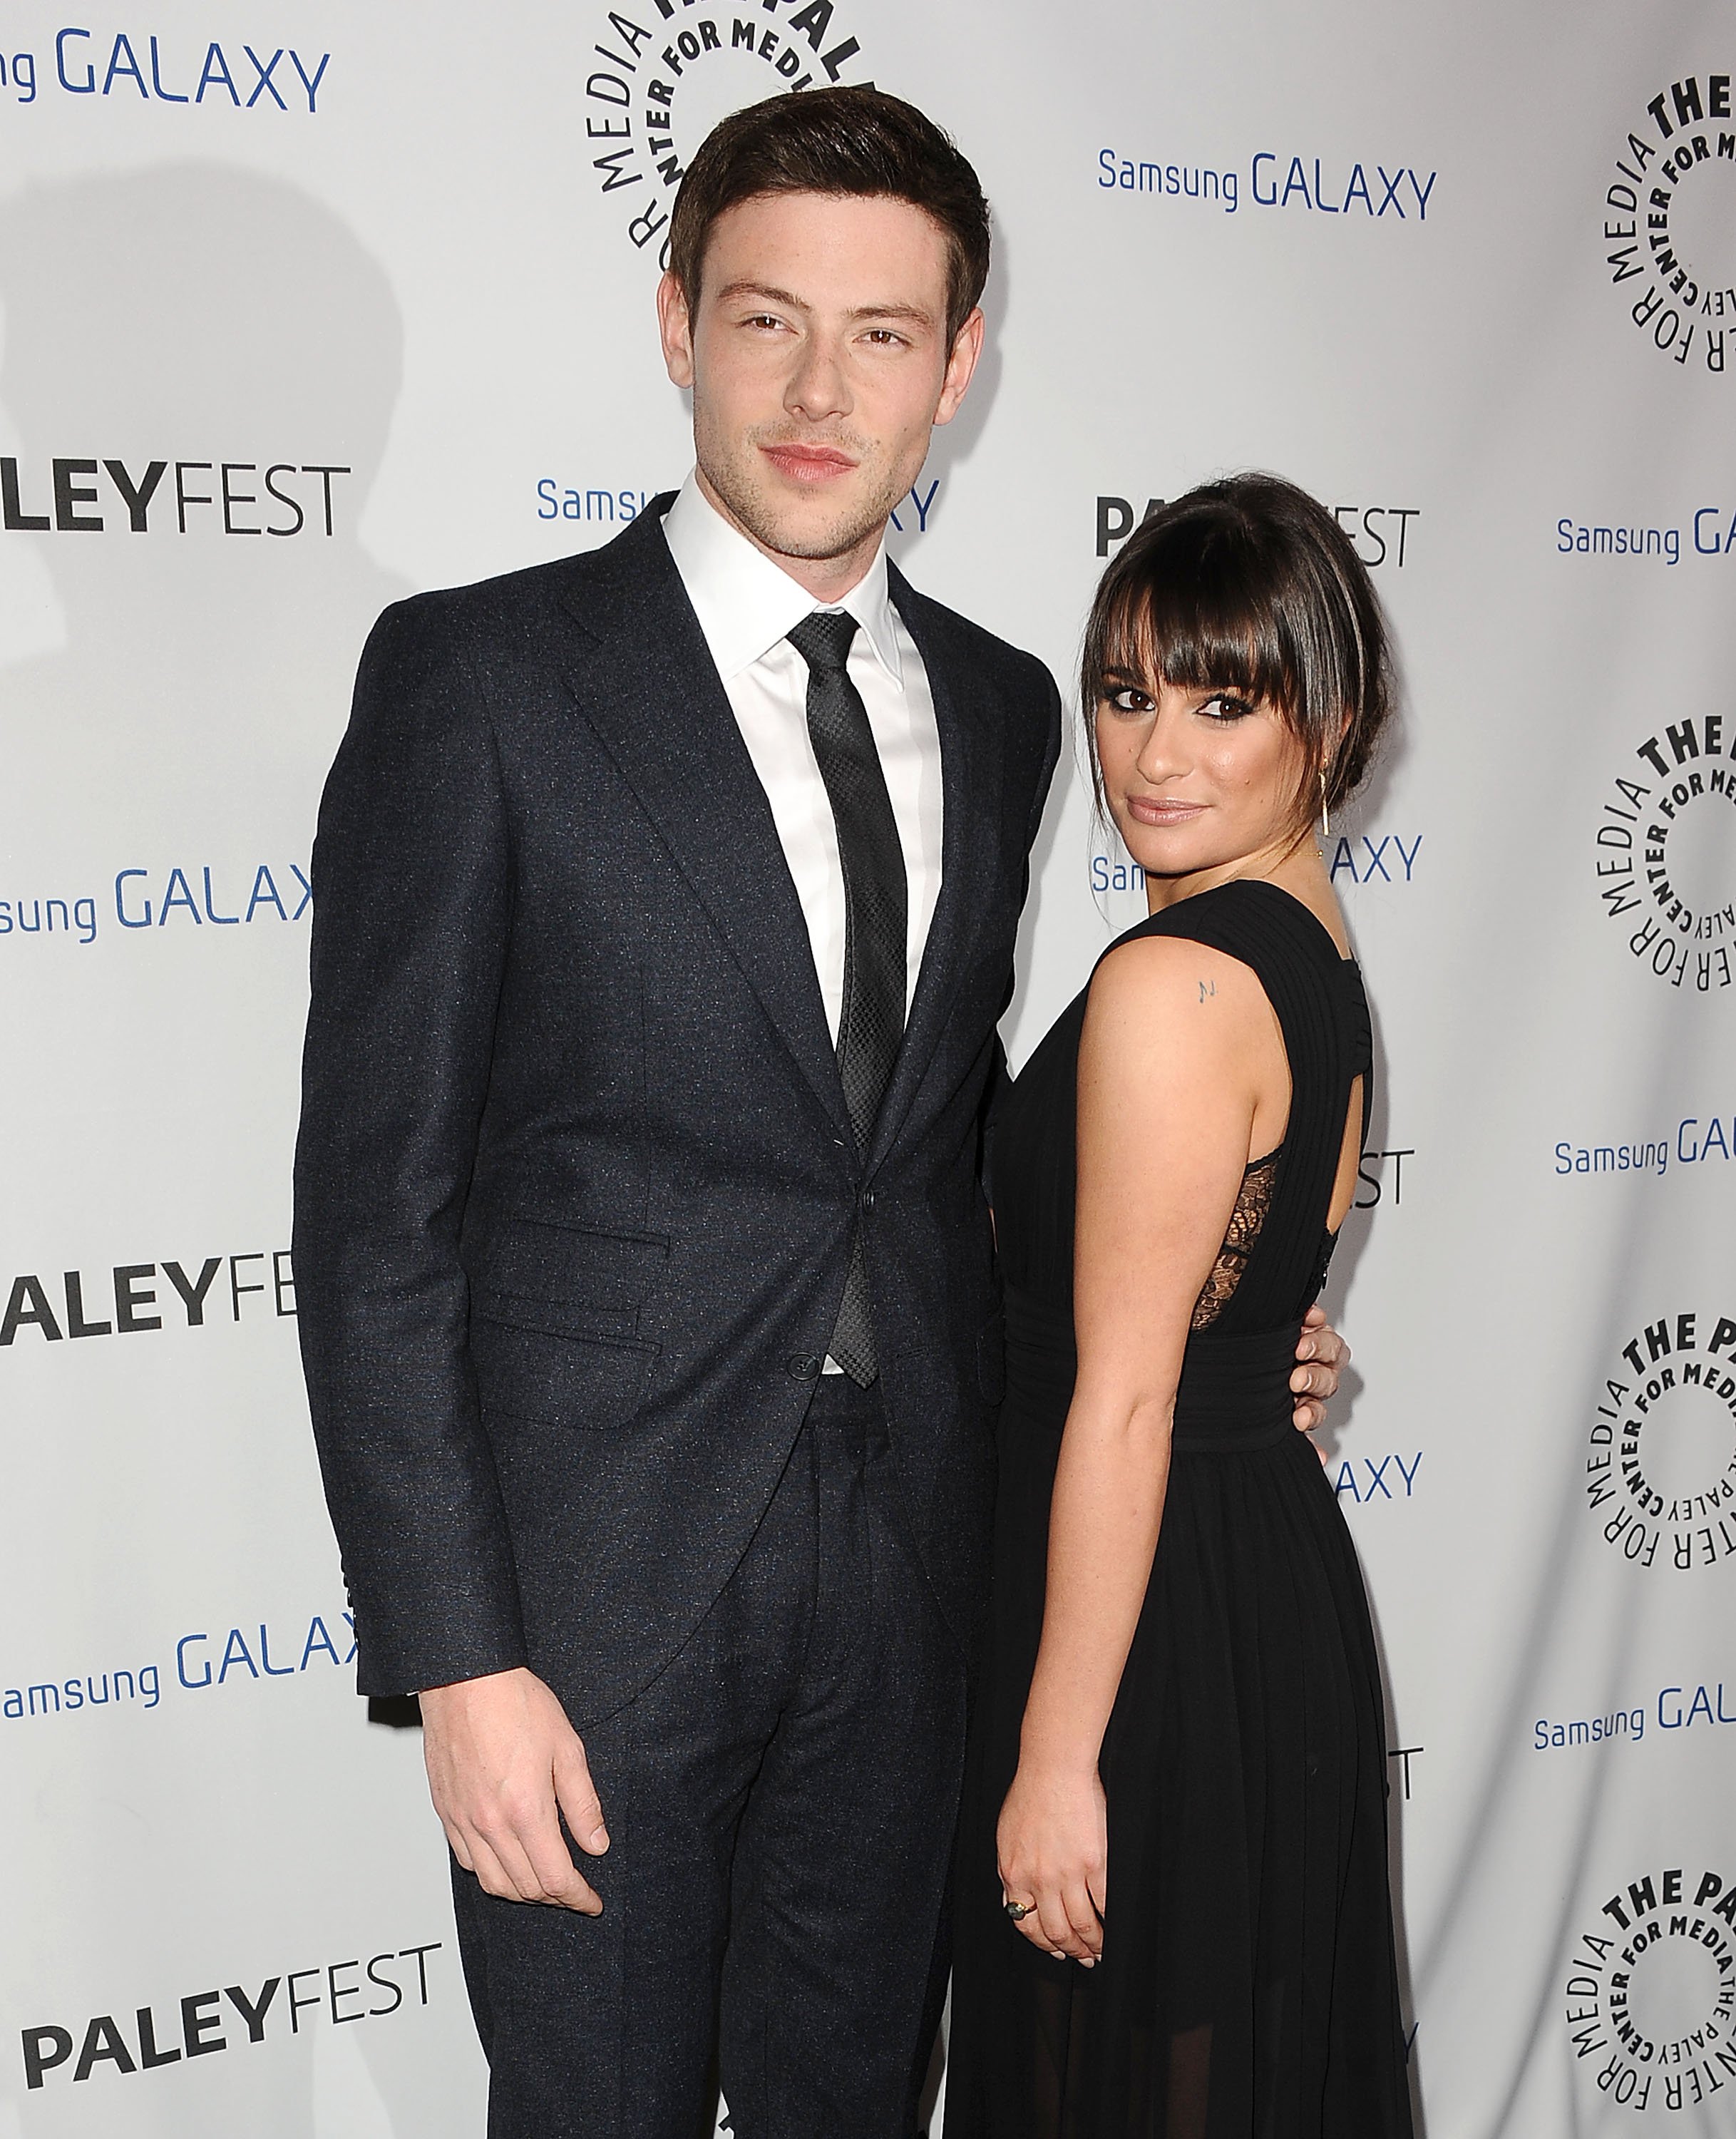 Cory Monteith and Lea Michele attending the PaleyFest Icon Award on February 27, 2013 | Source: Getty Images